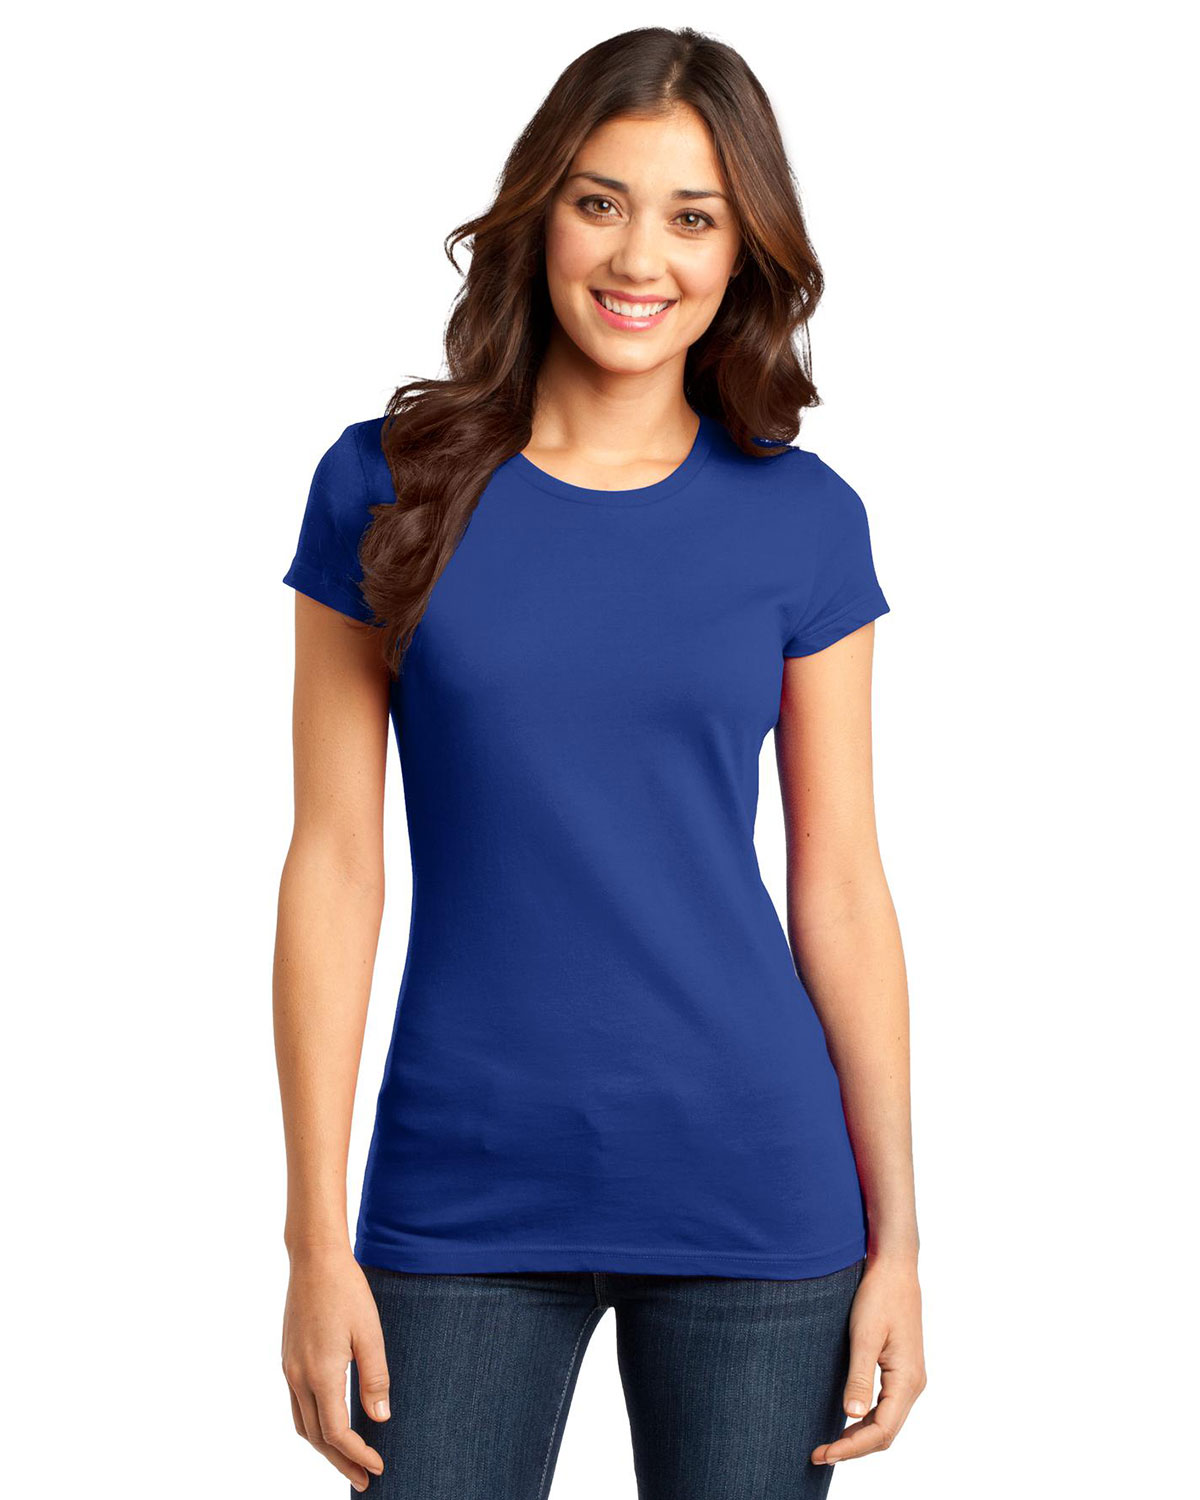 District DT6001 Women Very Important Tee at Apparelstation